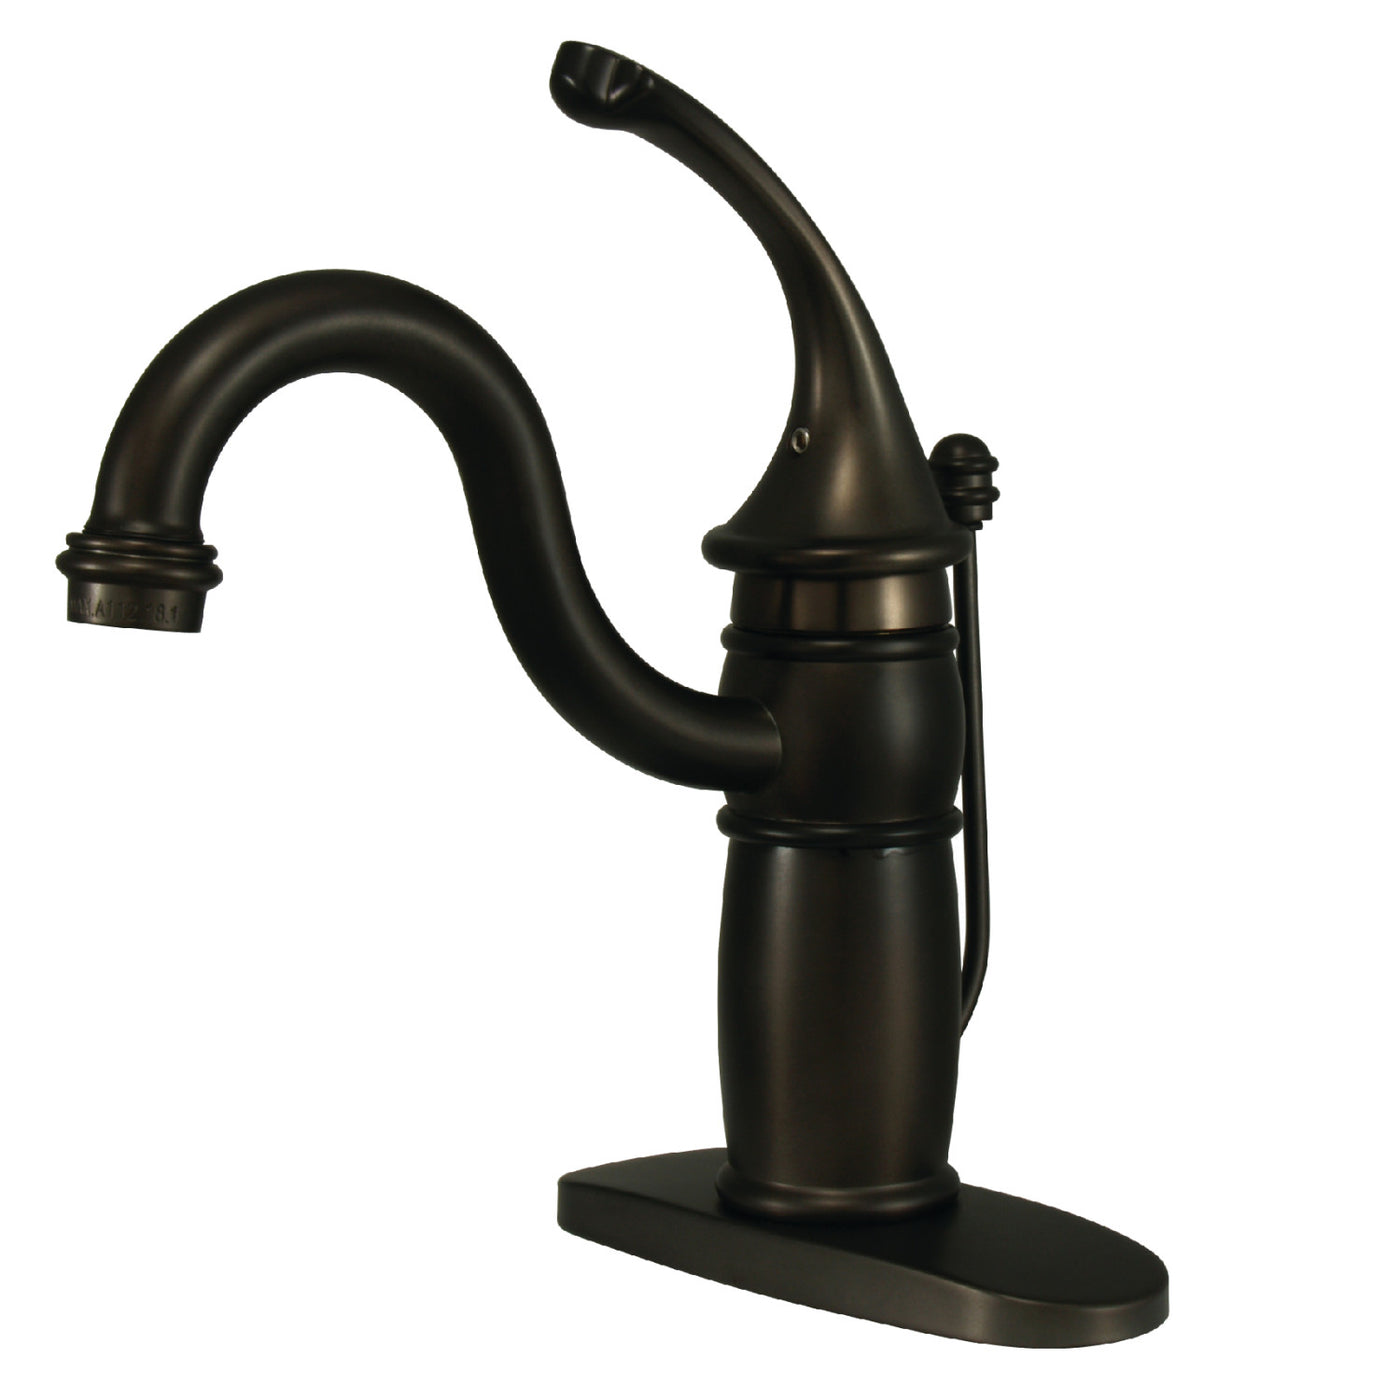 Elements of Design EB1405GL Single-Handle Bathroom Faucet with Pop-Up Drain, Oil Rubbed Bronze